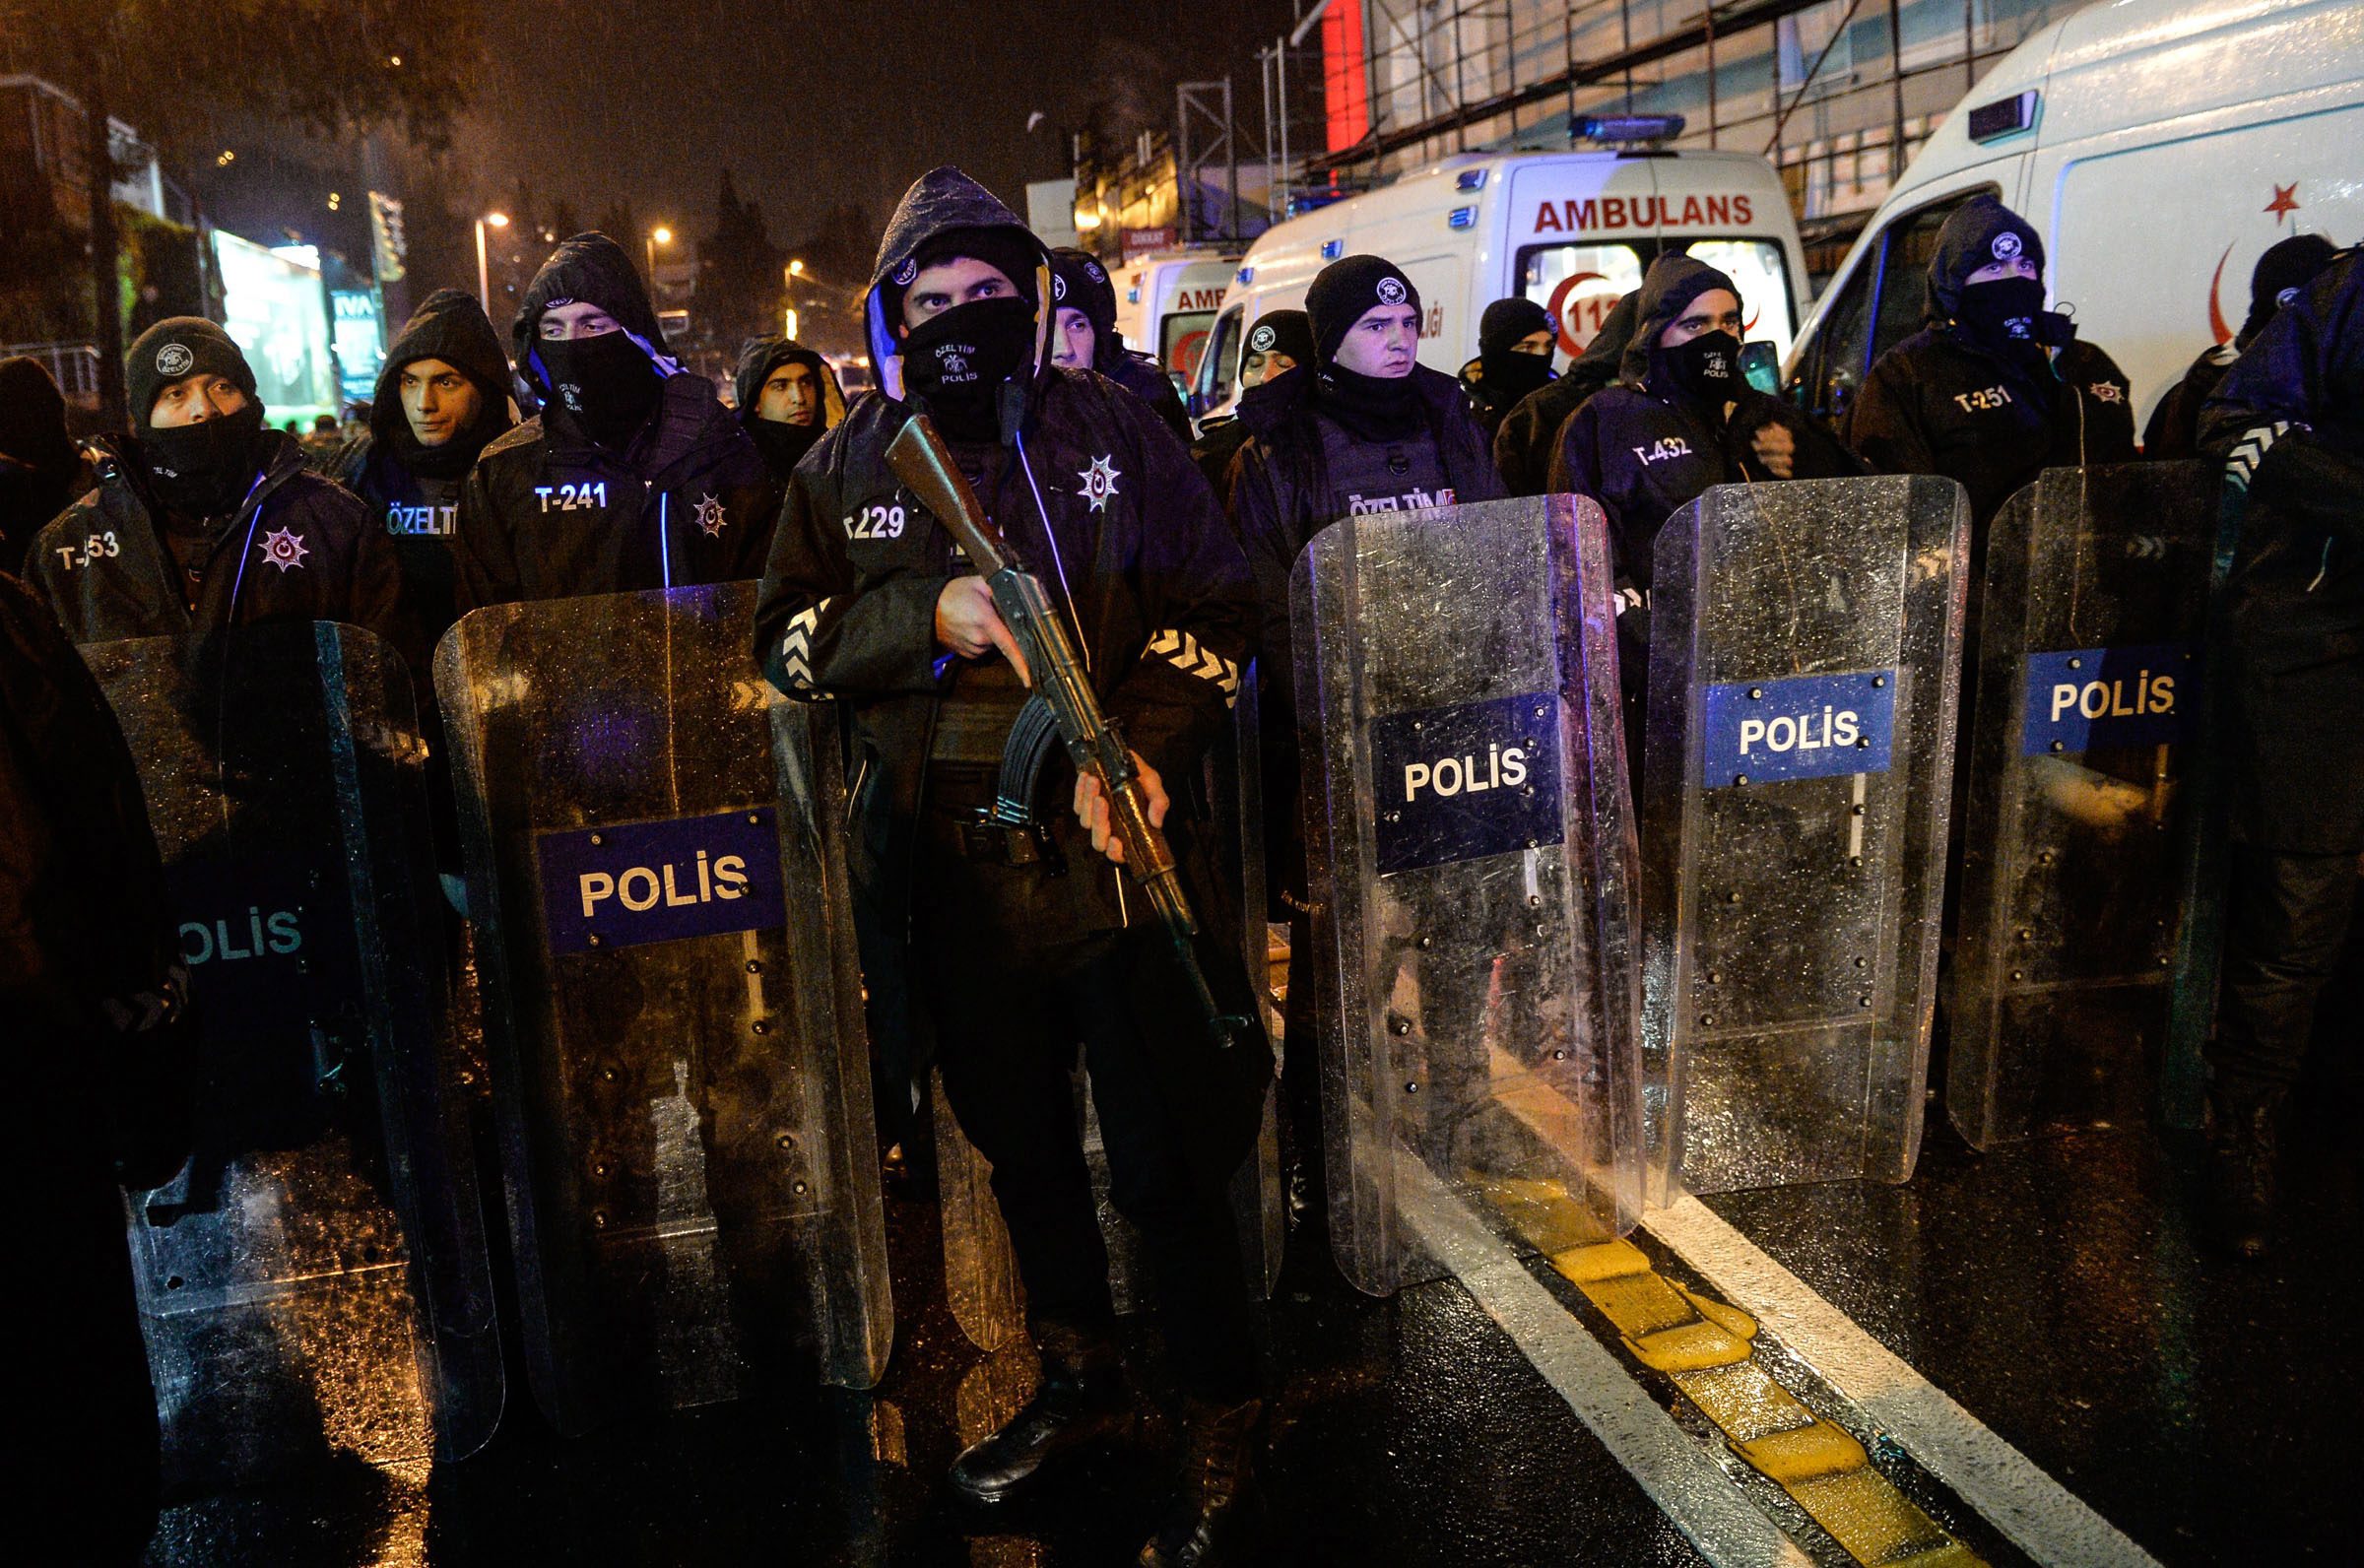 2017-01-01 04:19:25 epa05693624 Turkish riot police officers secure the area after a gun attack on Reina, a popular night club in Istanbul, near by the Bosphorus, Turkey, 01 January 2017. At least 35 people were killed and 40 others were wounded in the attack, local media reported. EPA/STR